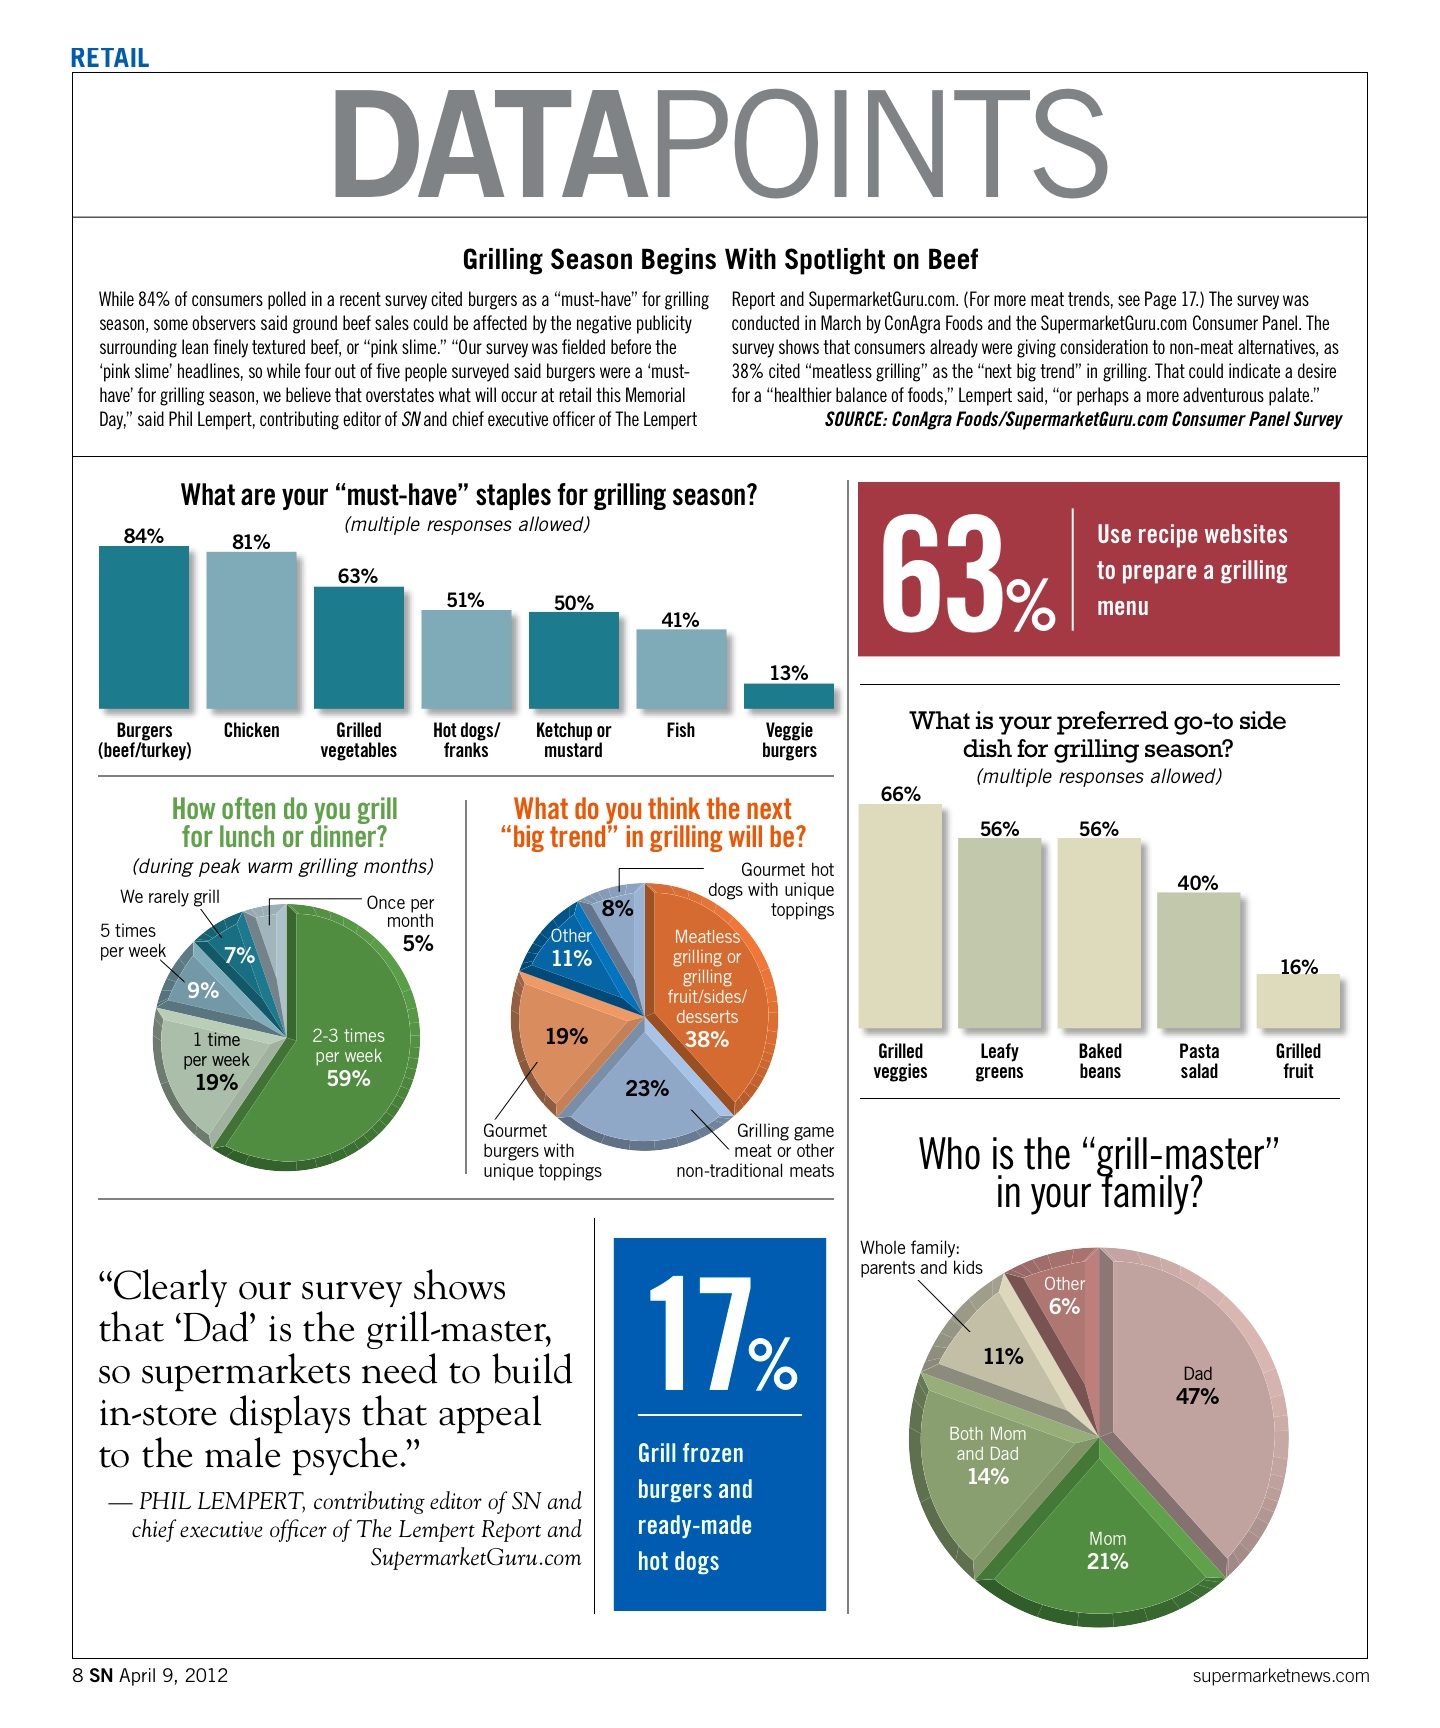 beef data points infographic  04 09 12 copy1 photo (unconventional uses data analytics )